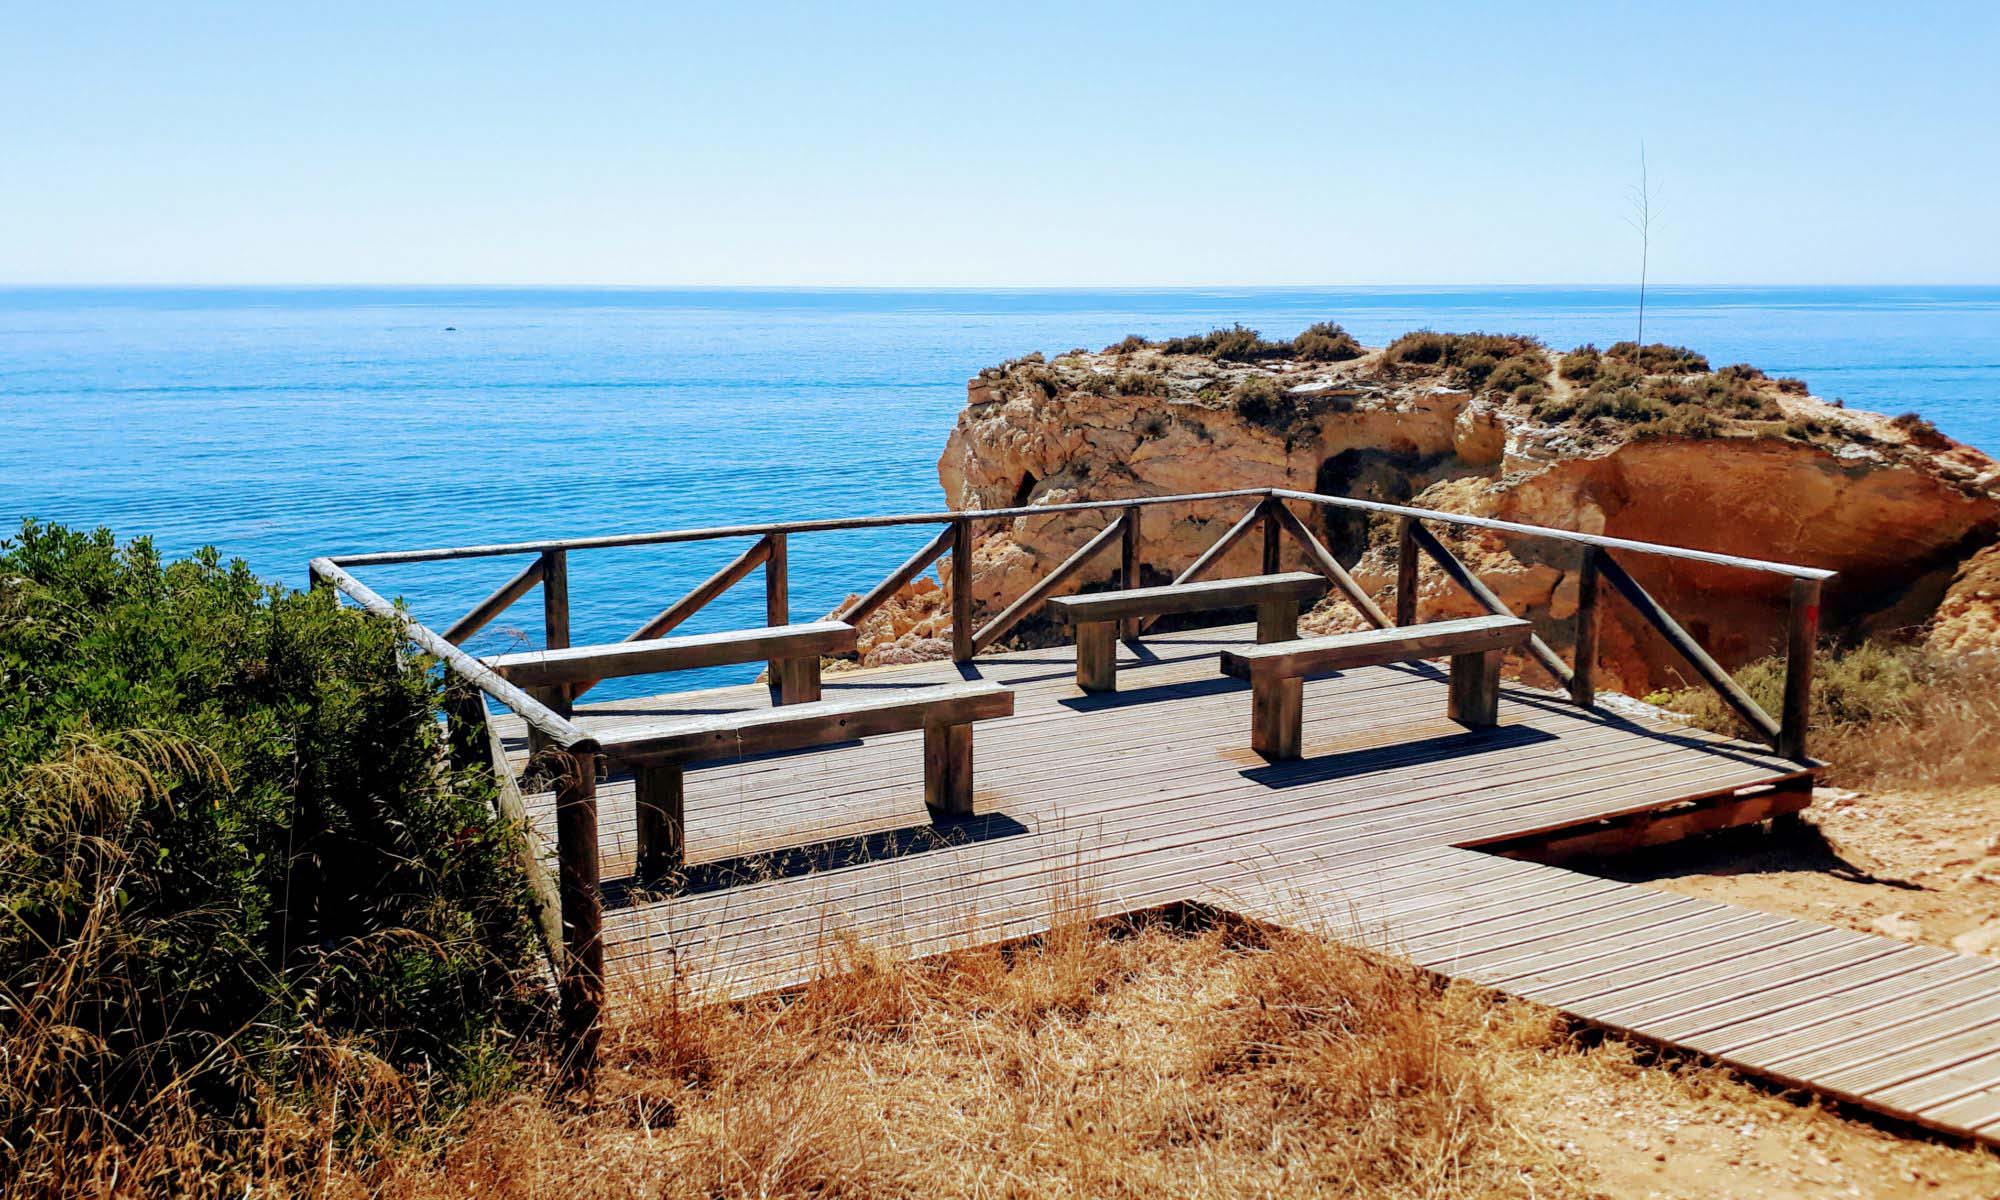 20 Things You Can Do at the Algarve